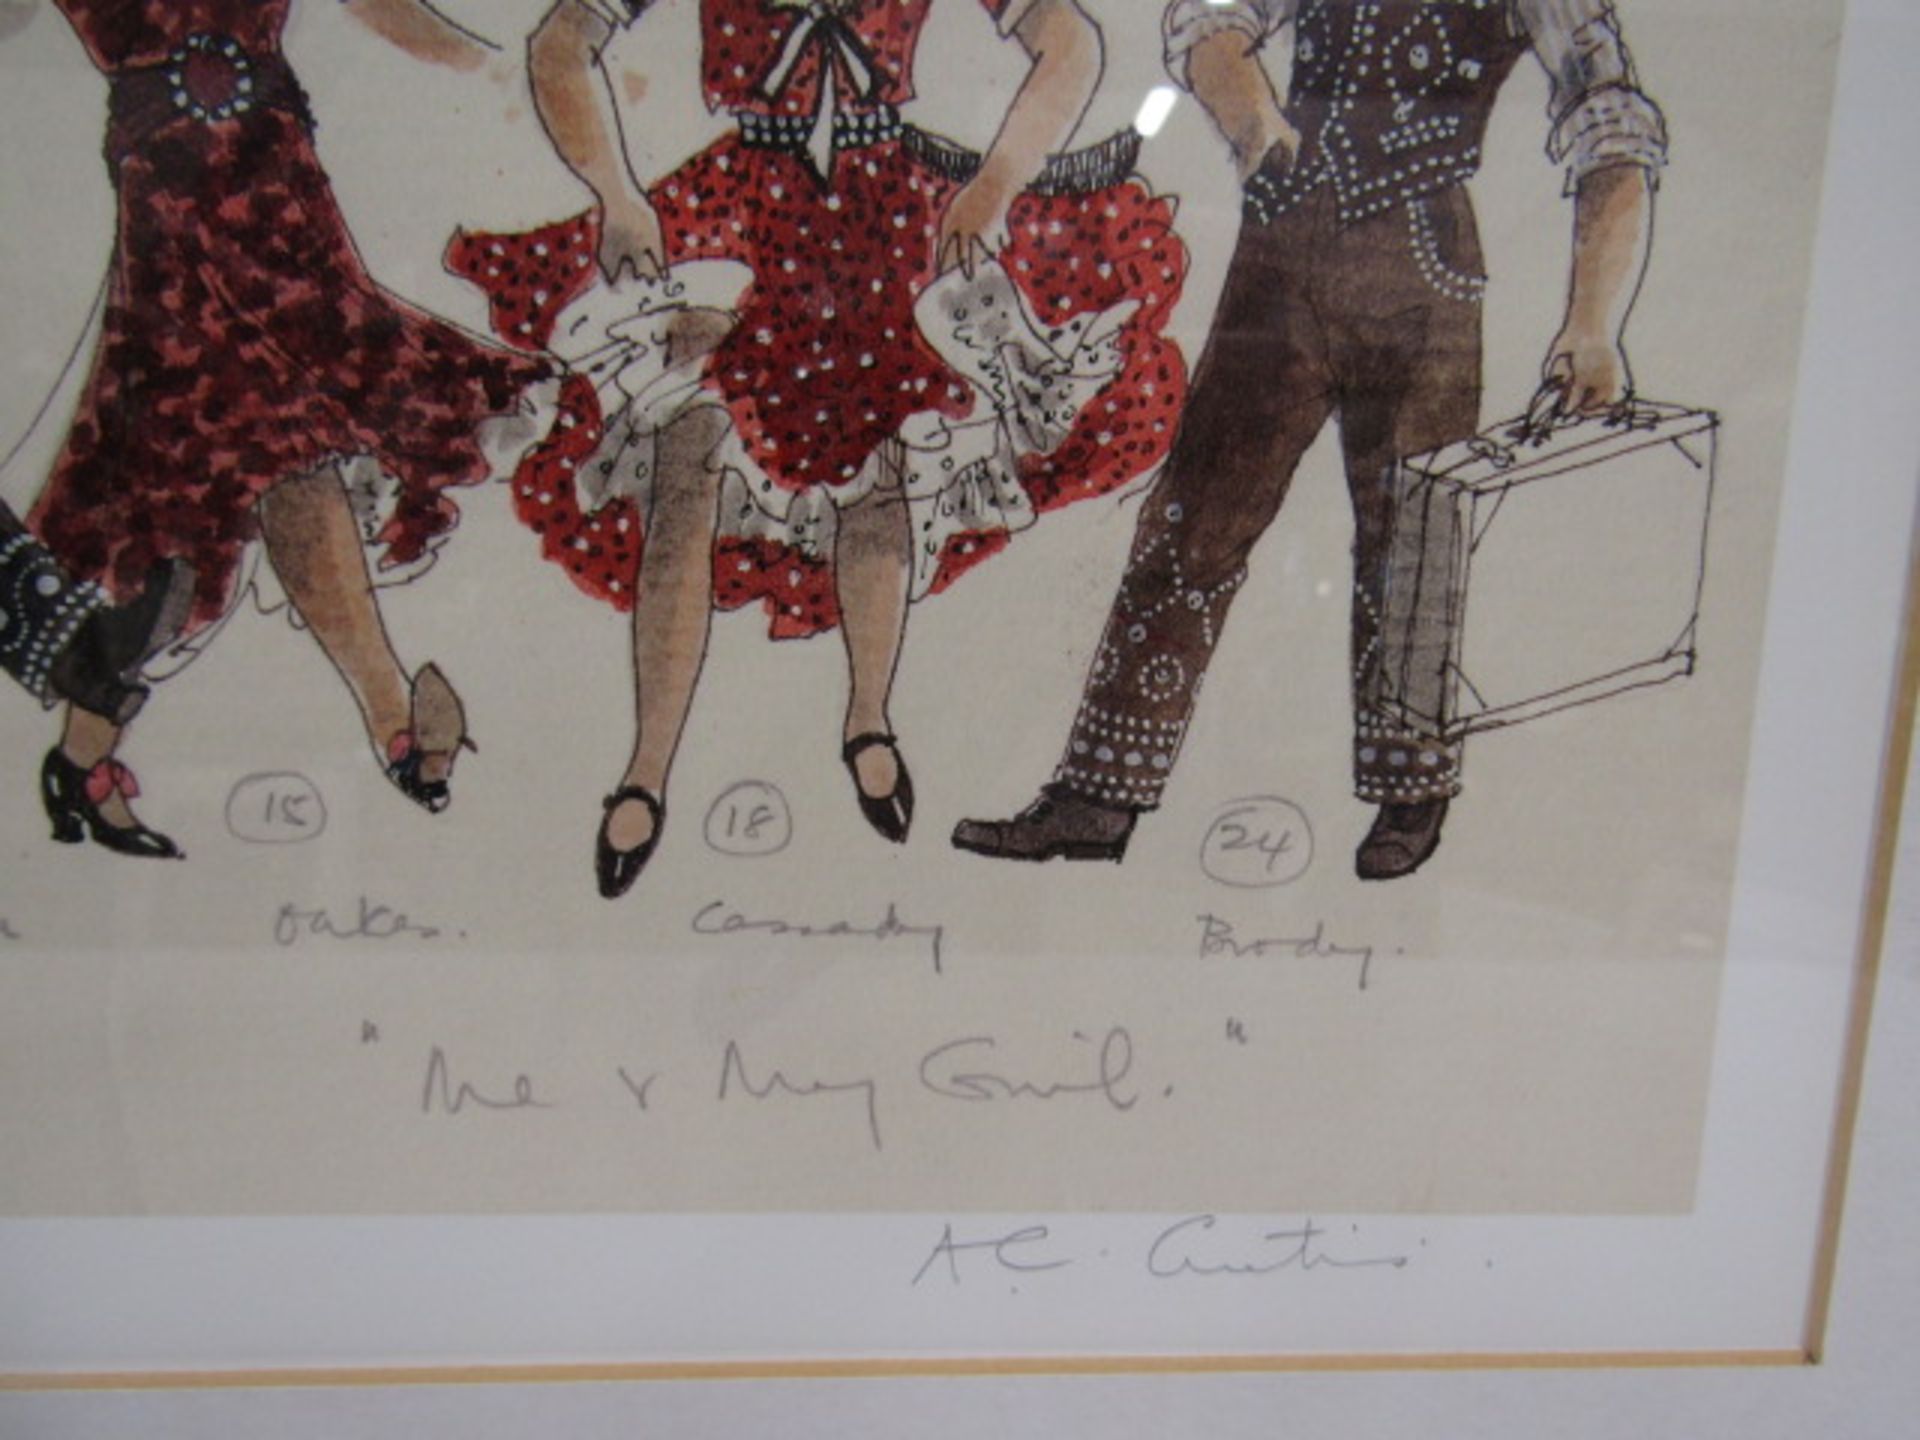 A.C Curtis 'Me and My Girl' costumes New York 1986 ltd edition print 12/300 pencil signed in margin - Image 4 of 6